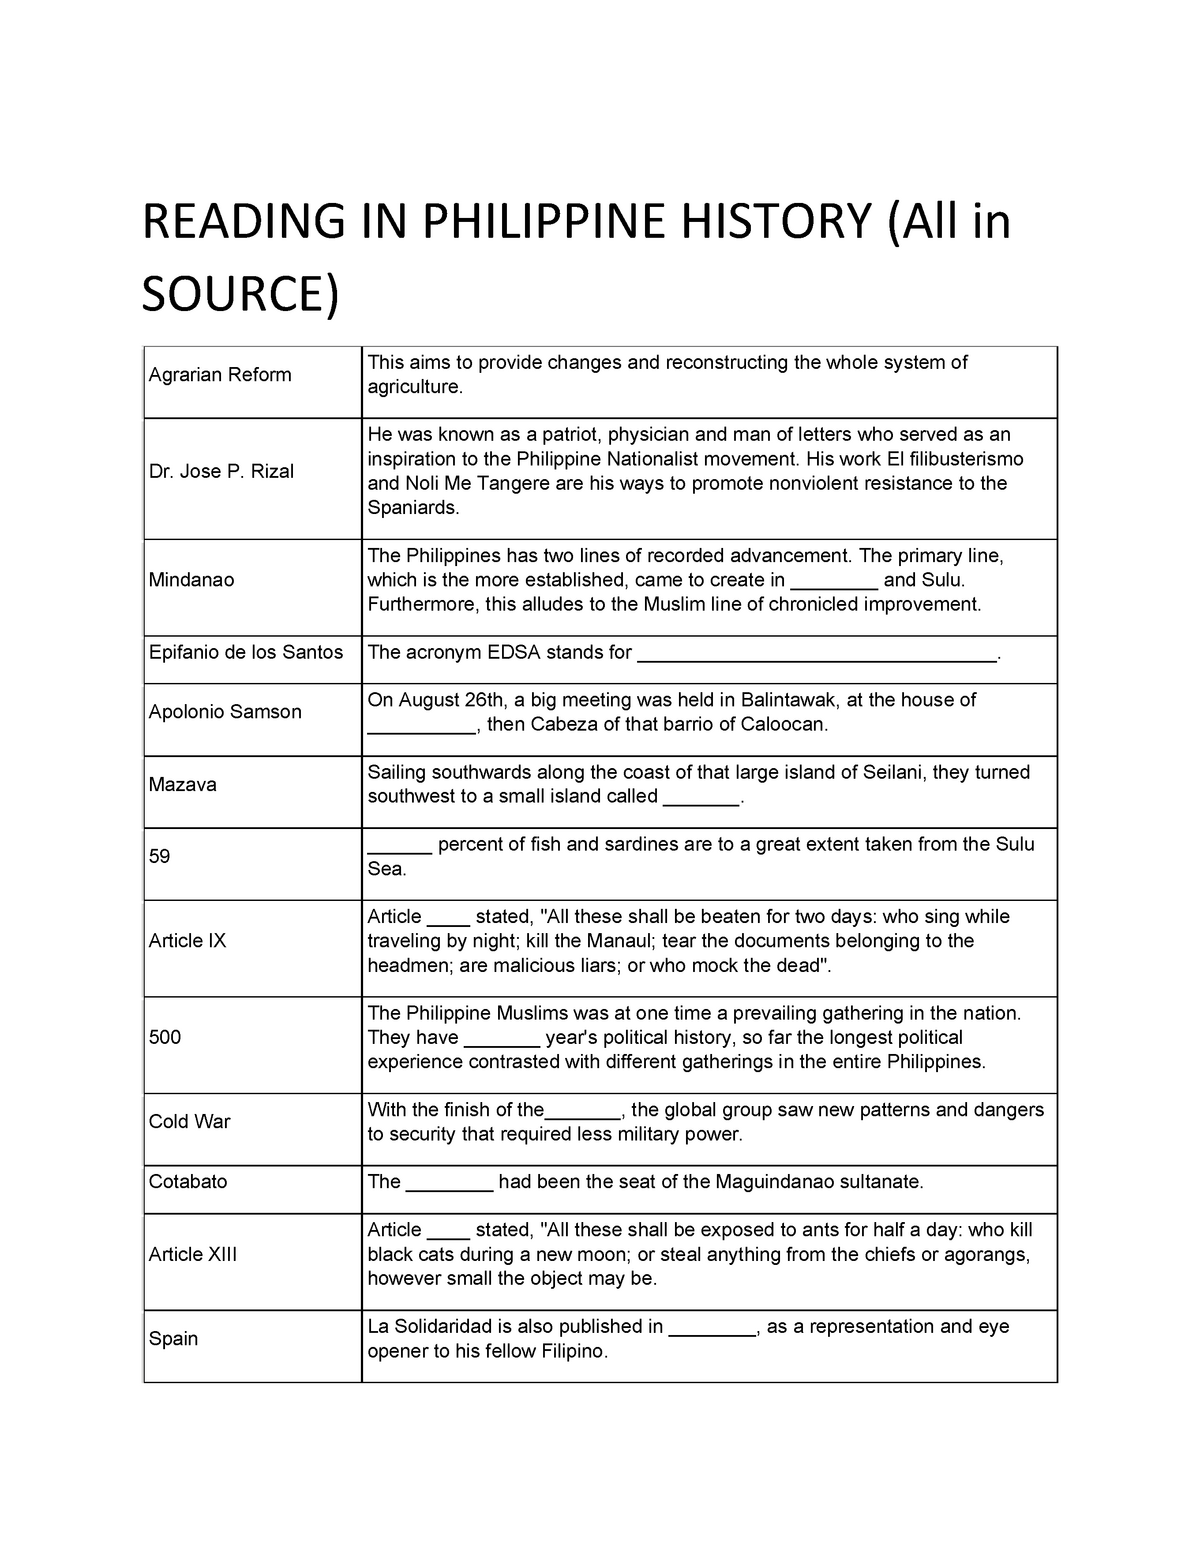 Reading In The Philippine History Gpc Slide Share - Bank2home.com